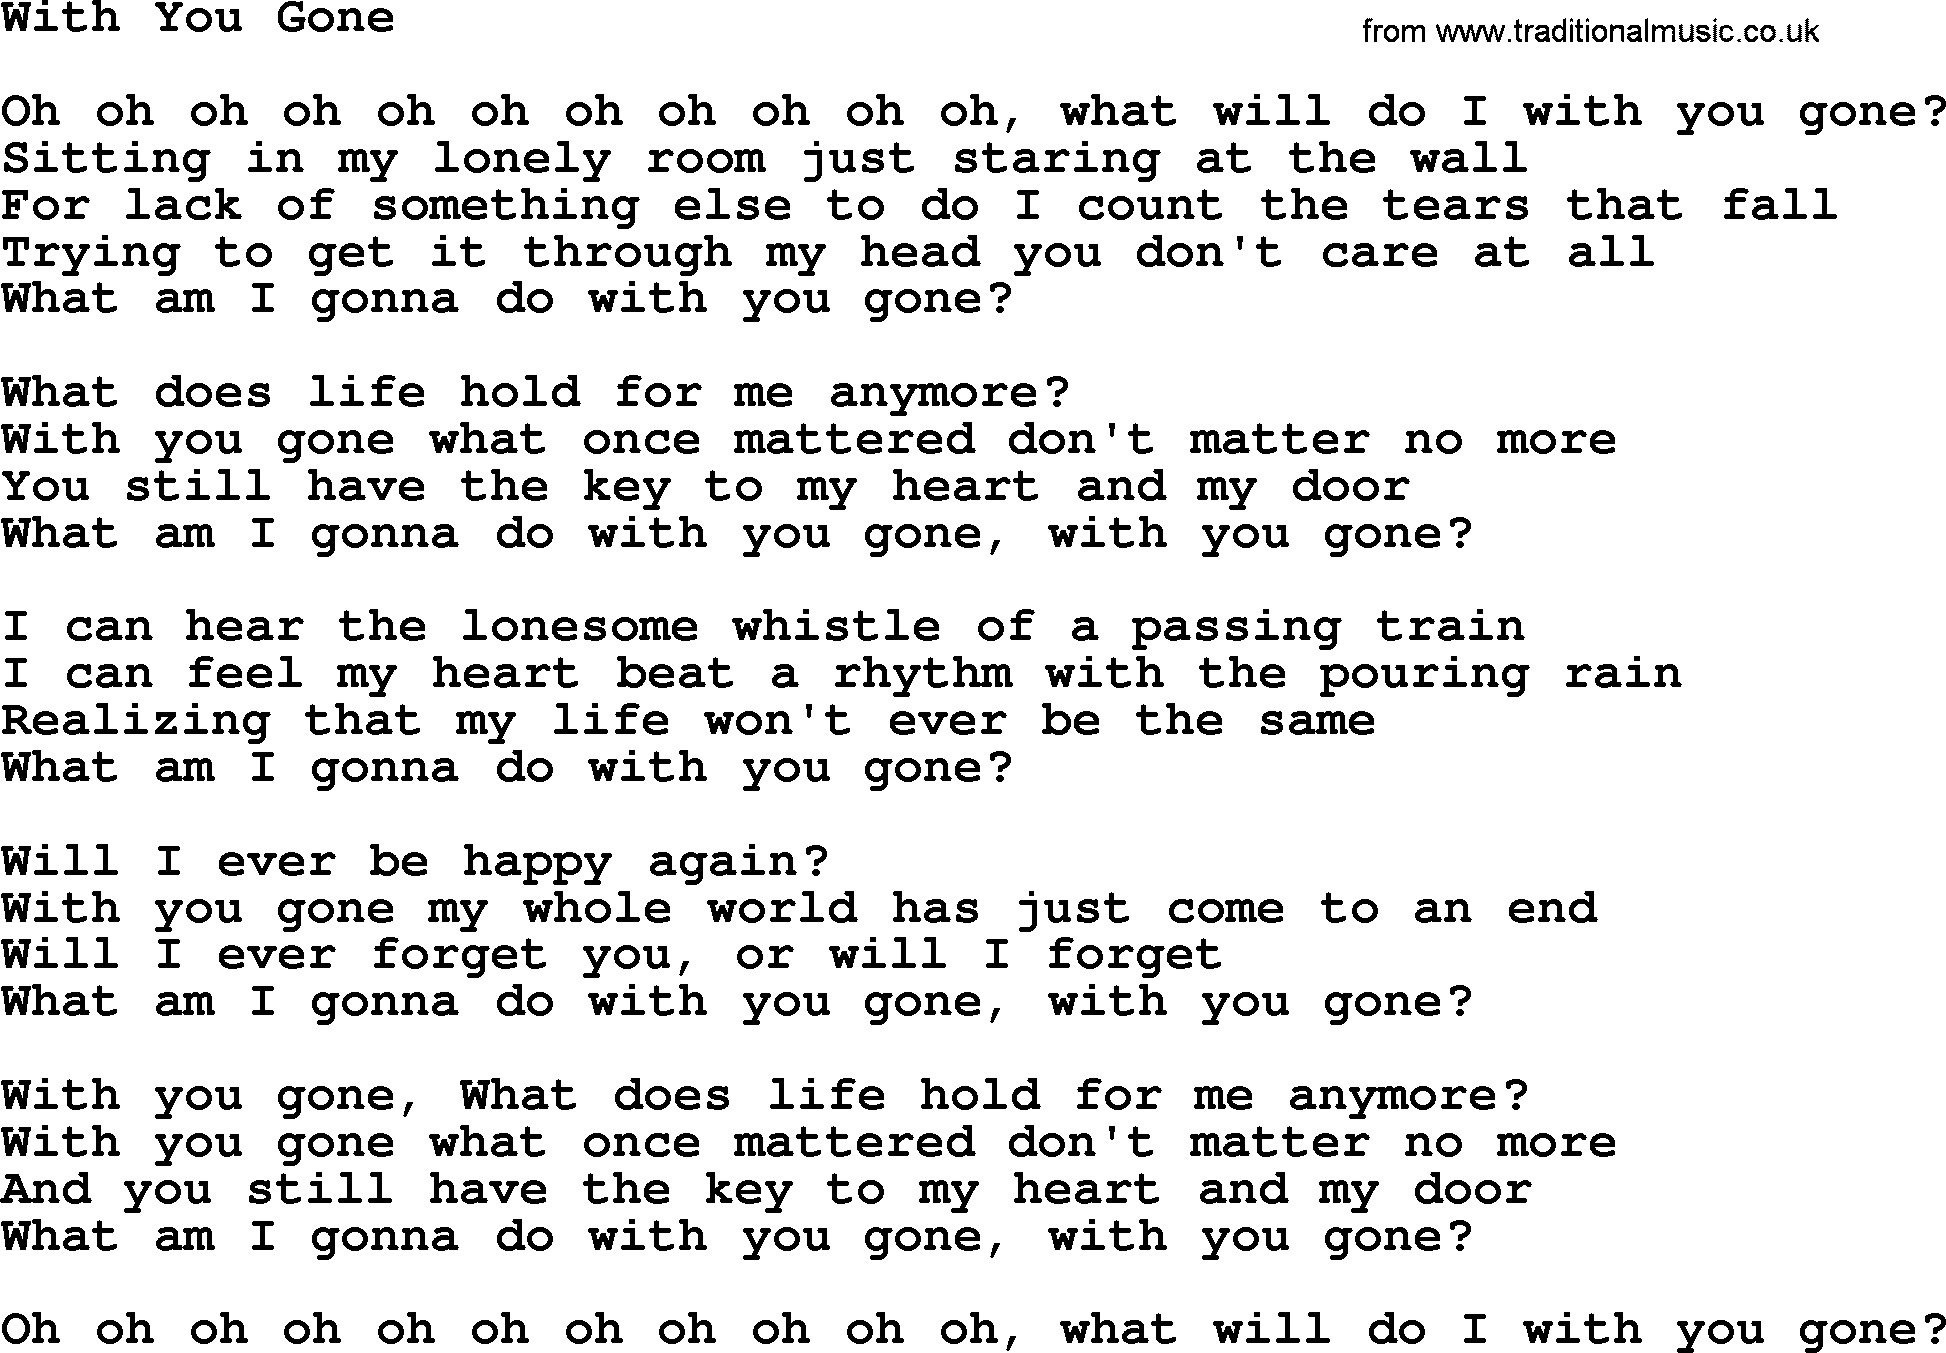 Dolly Parton song With You Gone.txt lyrics